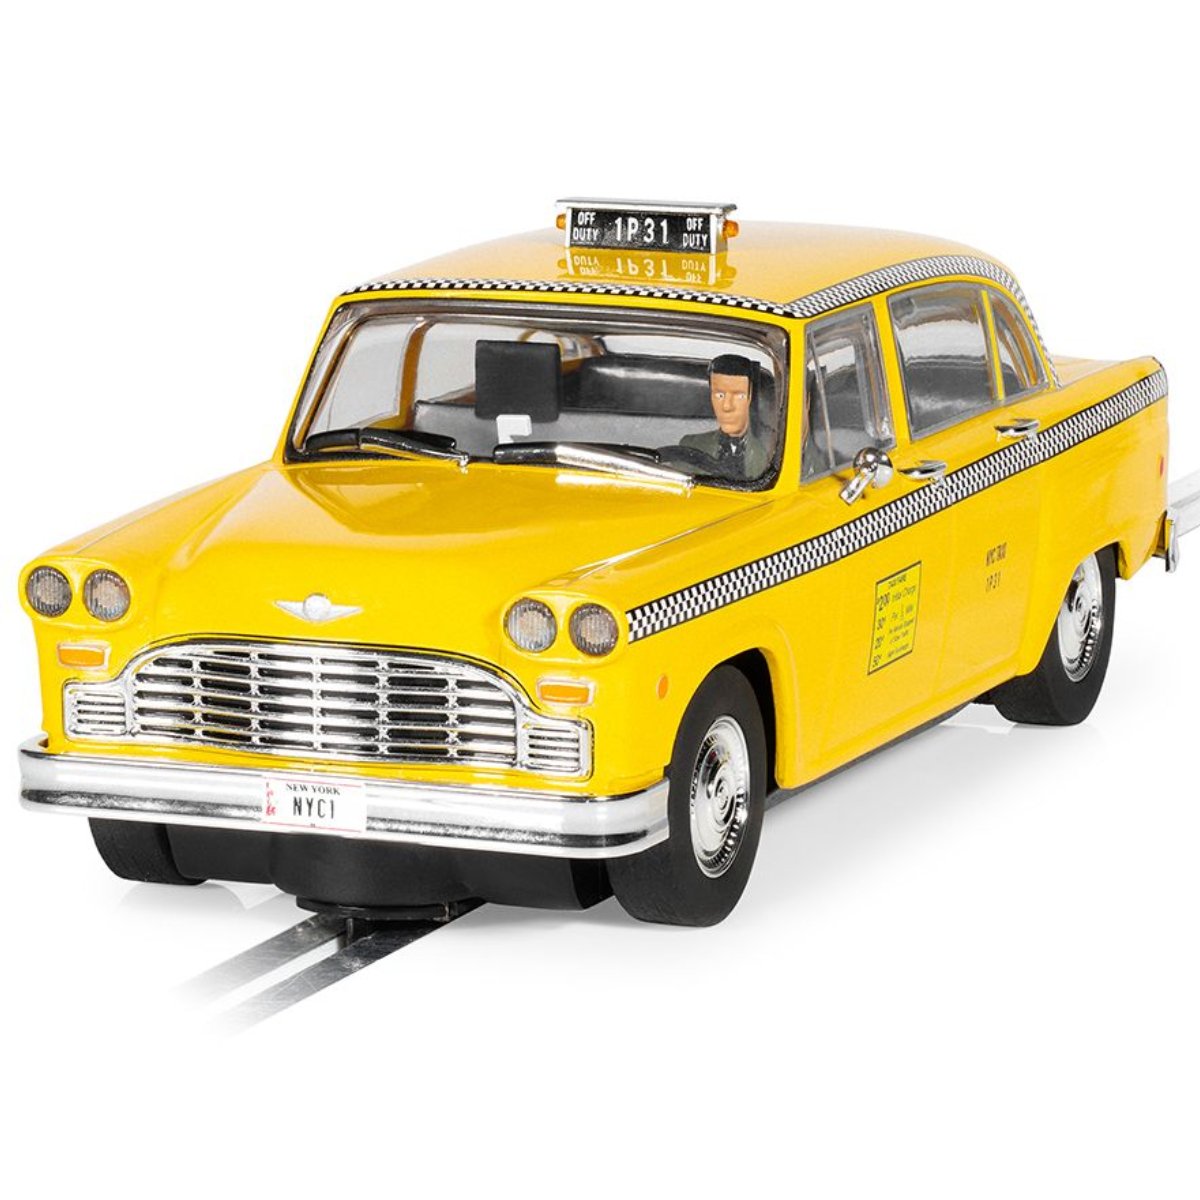 Scalextric C4432 1977 NYC Taxi - Phillips Hobbies